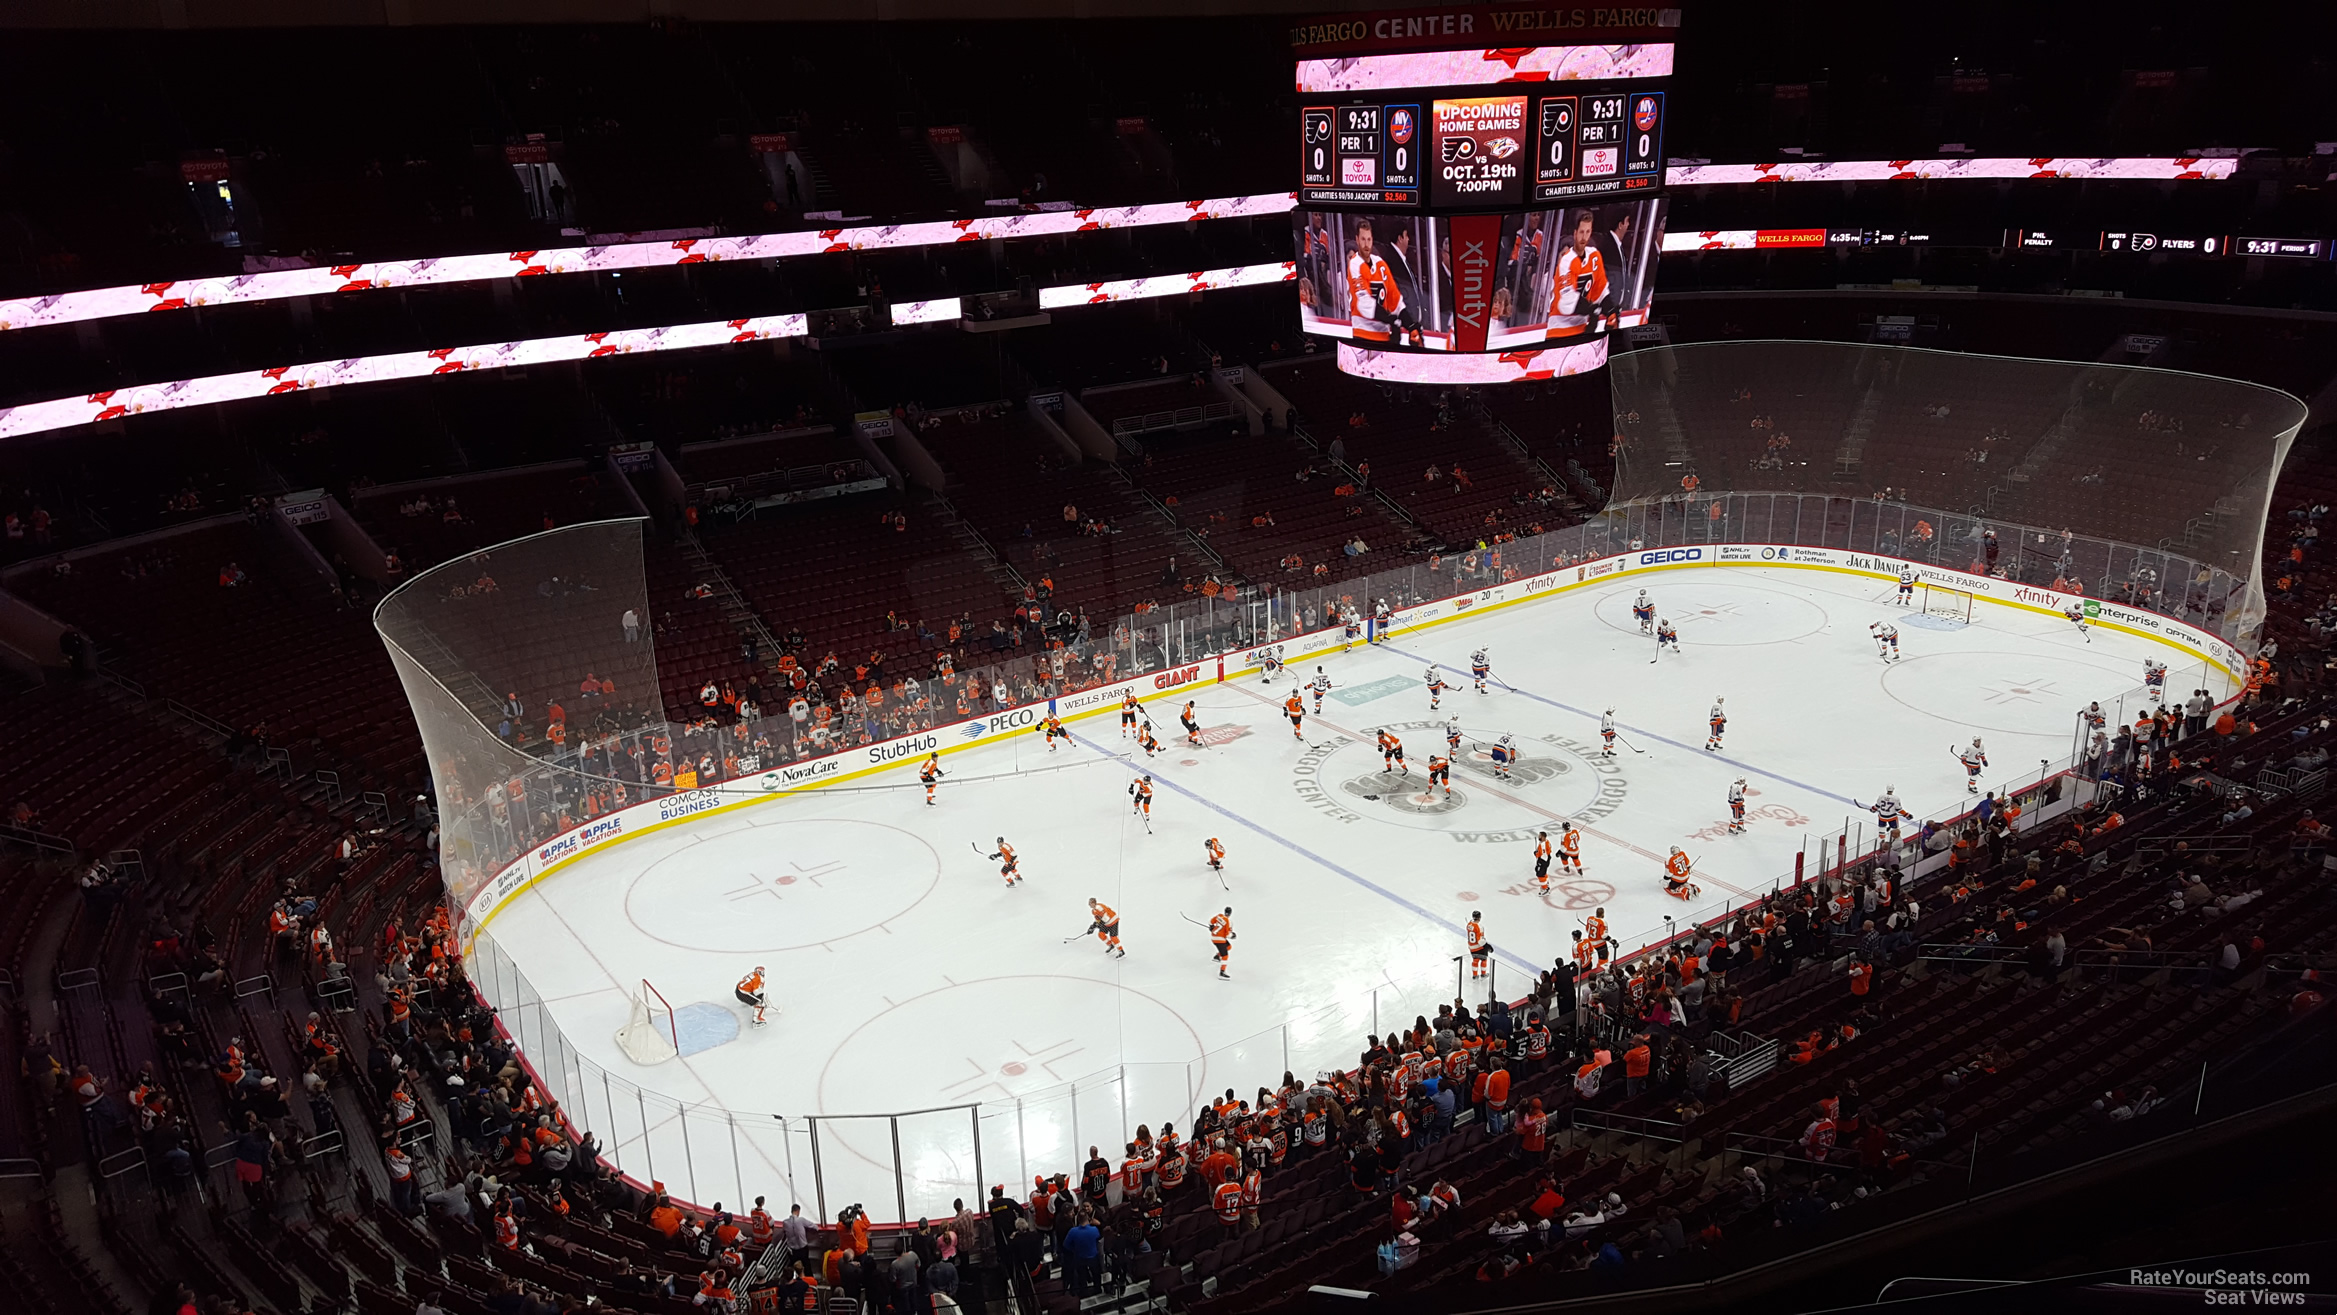 section 222, row 8 seat view  for hockey - wells fargo center